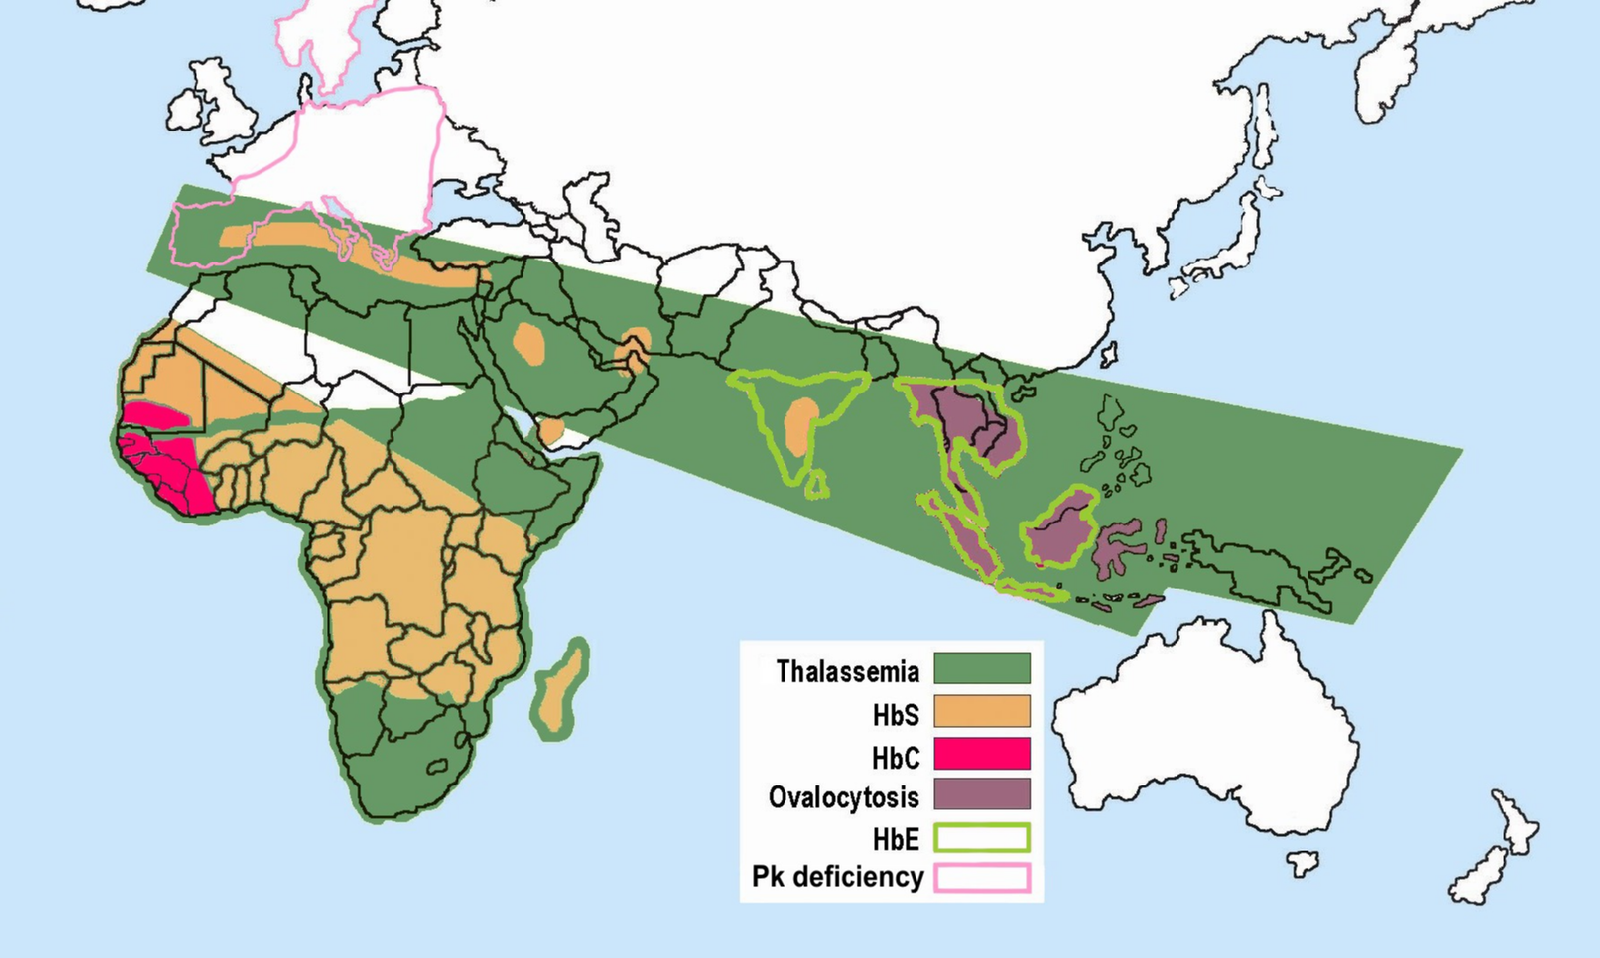 Map illustrating distribution of sickle cell and associated erythrocytic abnormalities for Africa and Asia.